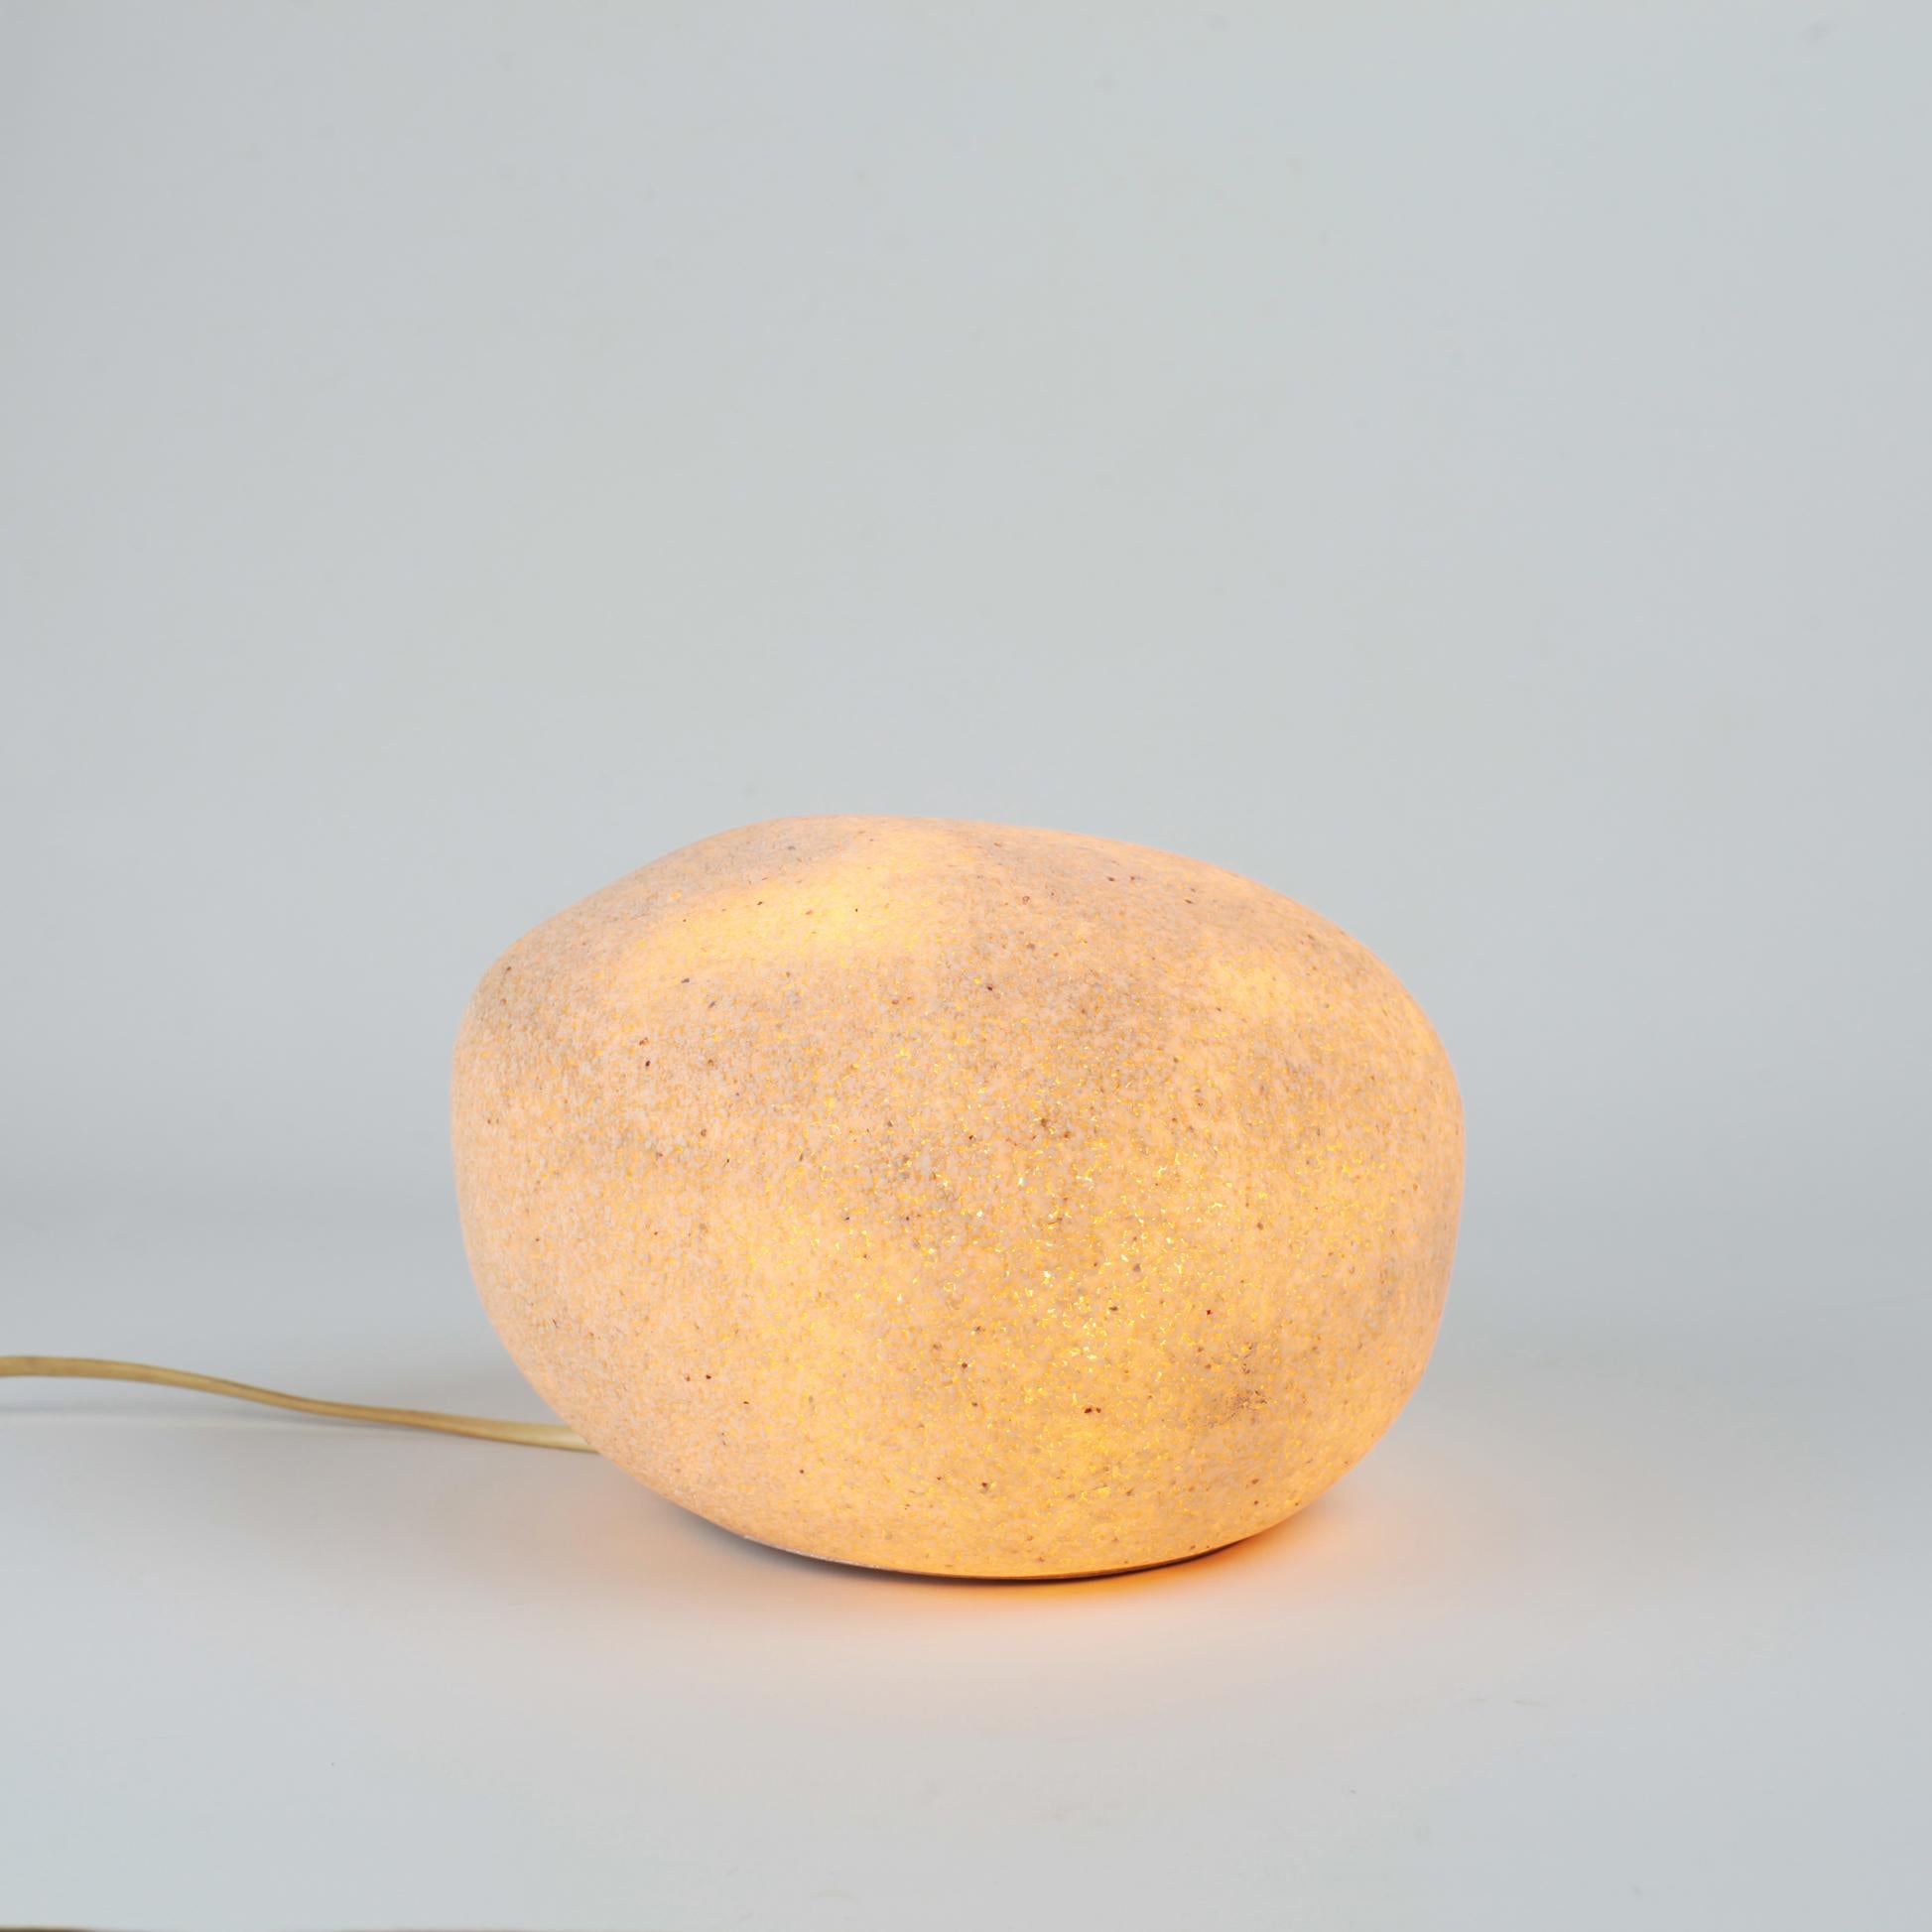 Stone shaped lamp model Dora by André Cazenave for Atelier A, France, 1960s
Polyester resin and marble powder.
Very good condition.